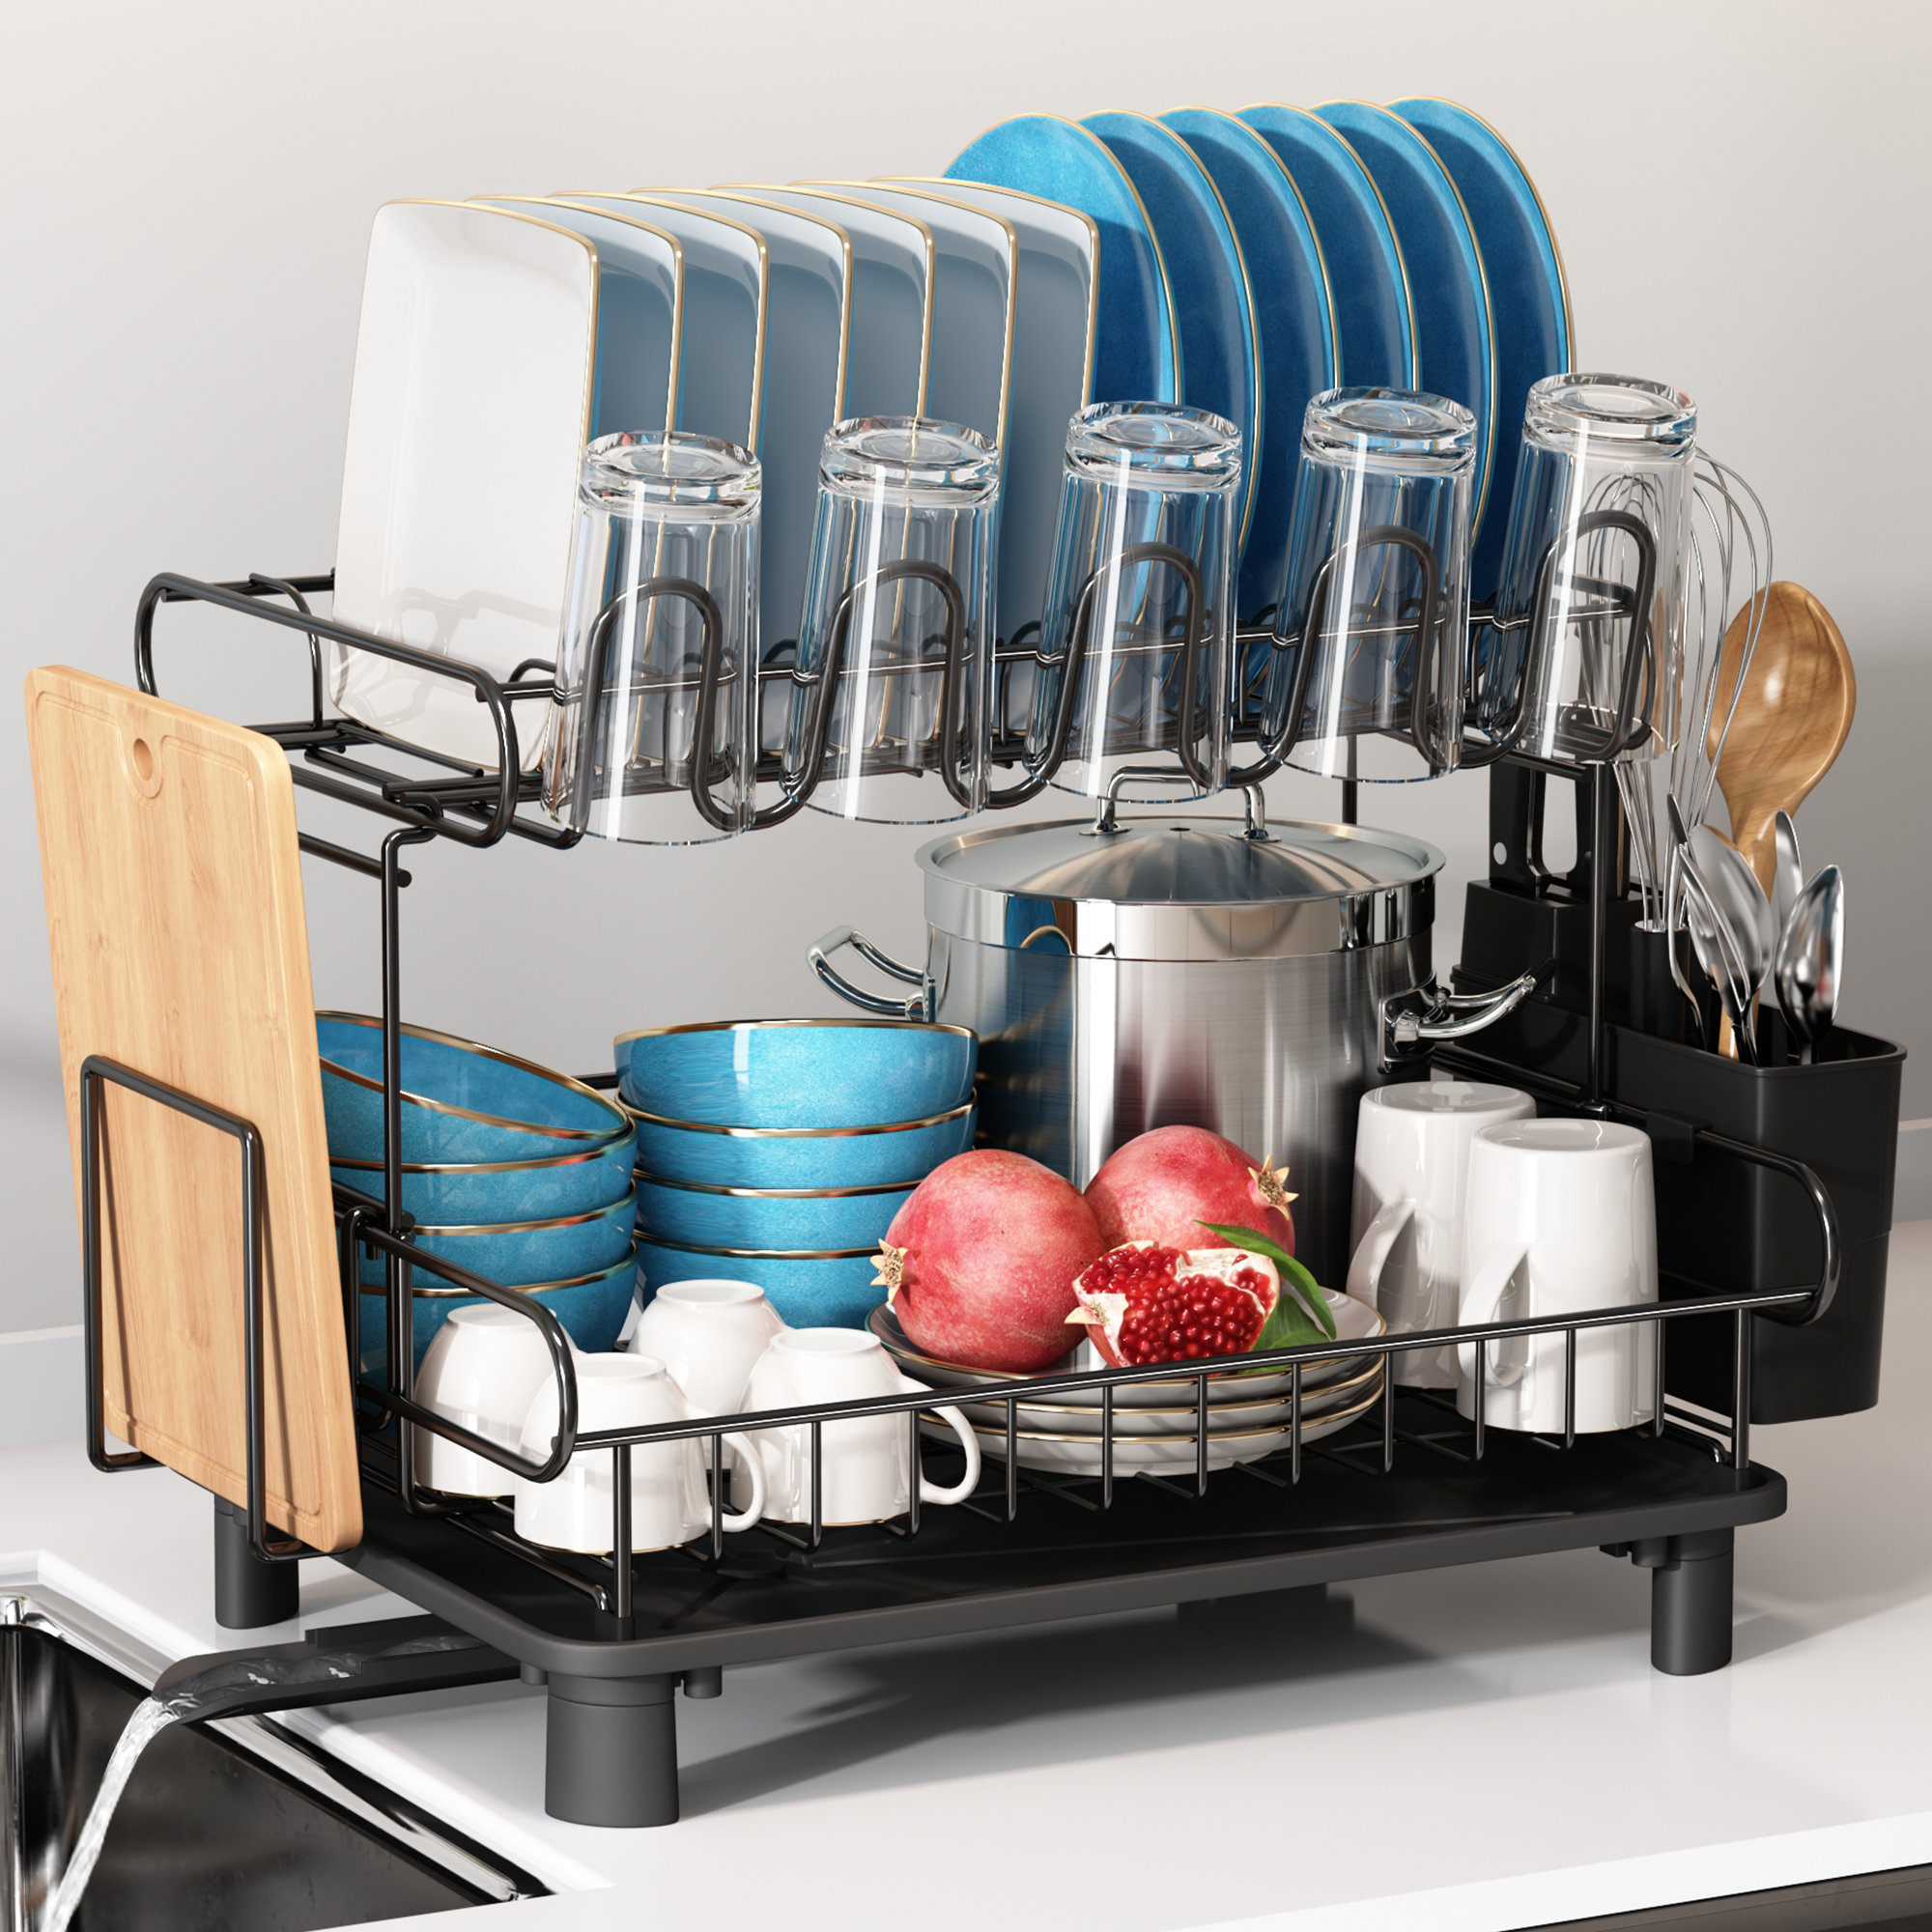  Dish Drying Rack, 2 Tier Dish Racks for Kitchen Counter, Dish  Drainer Dish Rack with Pots & Pans Holder, Large Dish Drying Rack with  Drainboard Utensil Holder Cup Holder Cutting